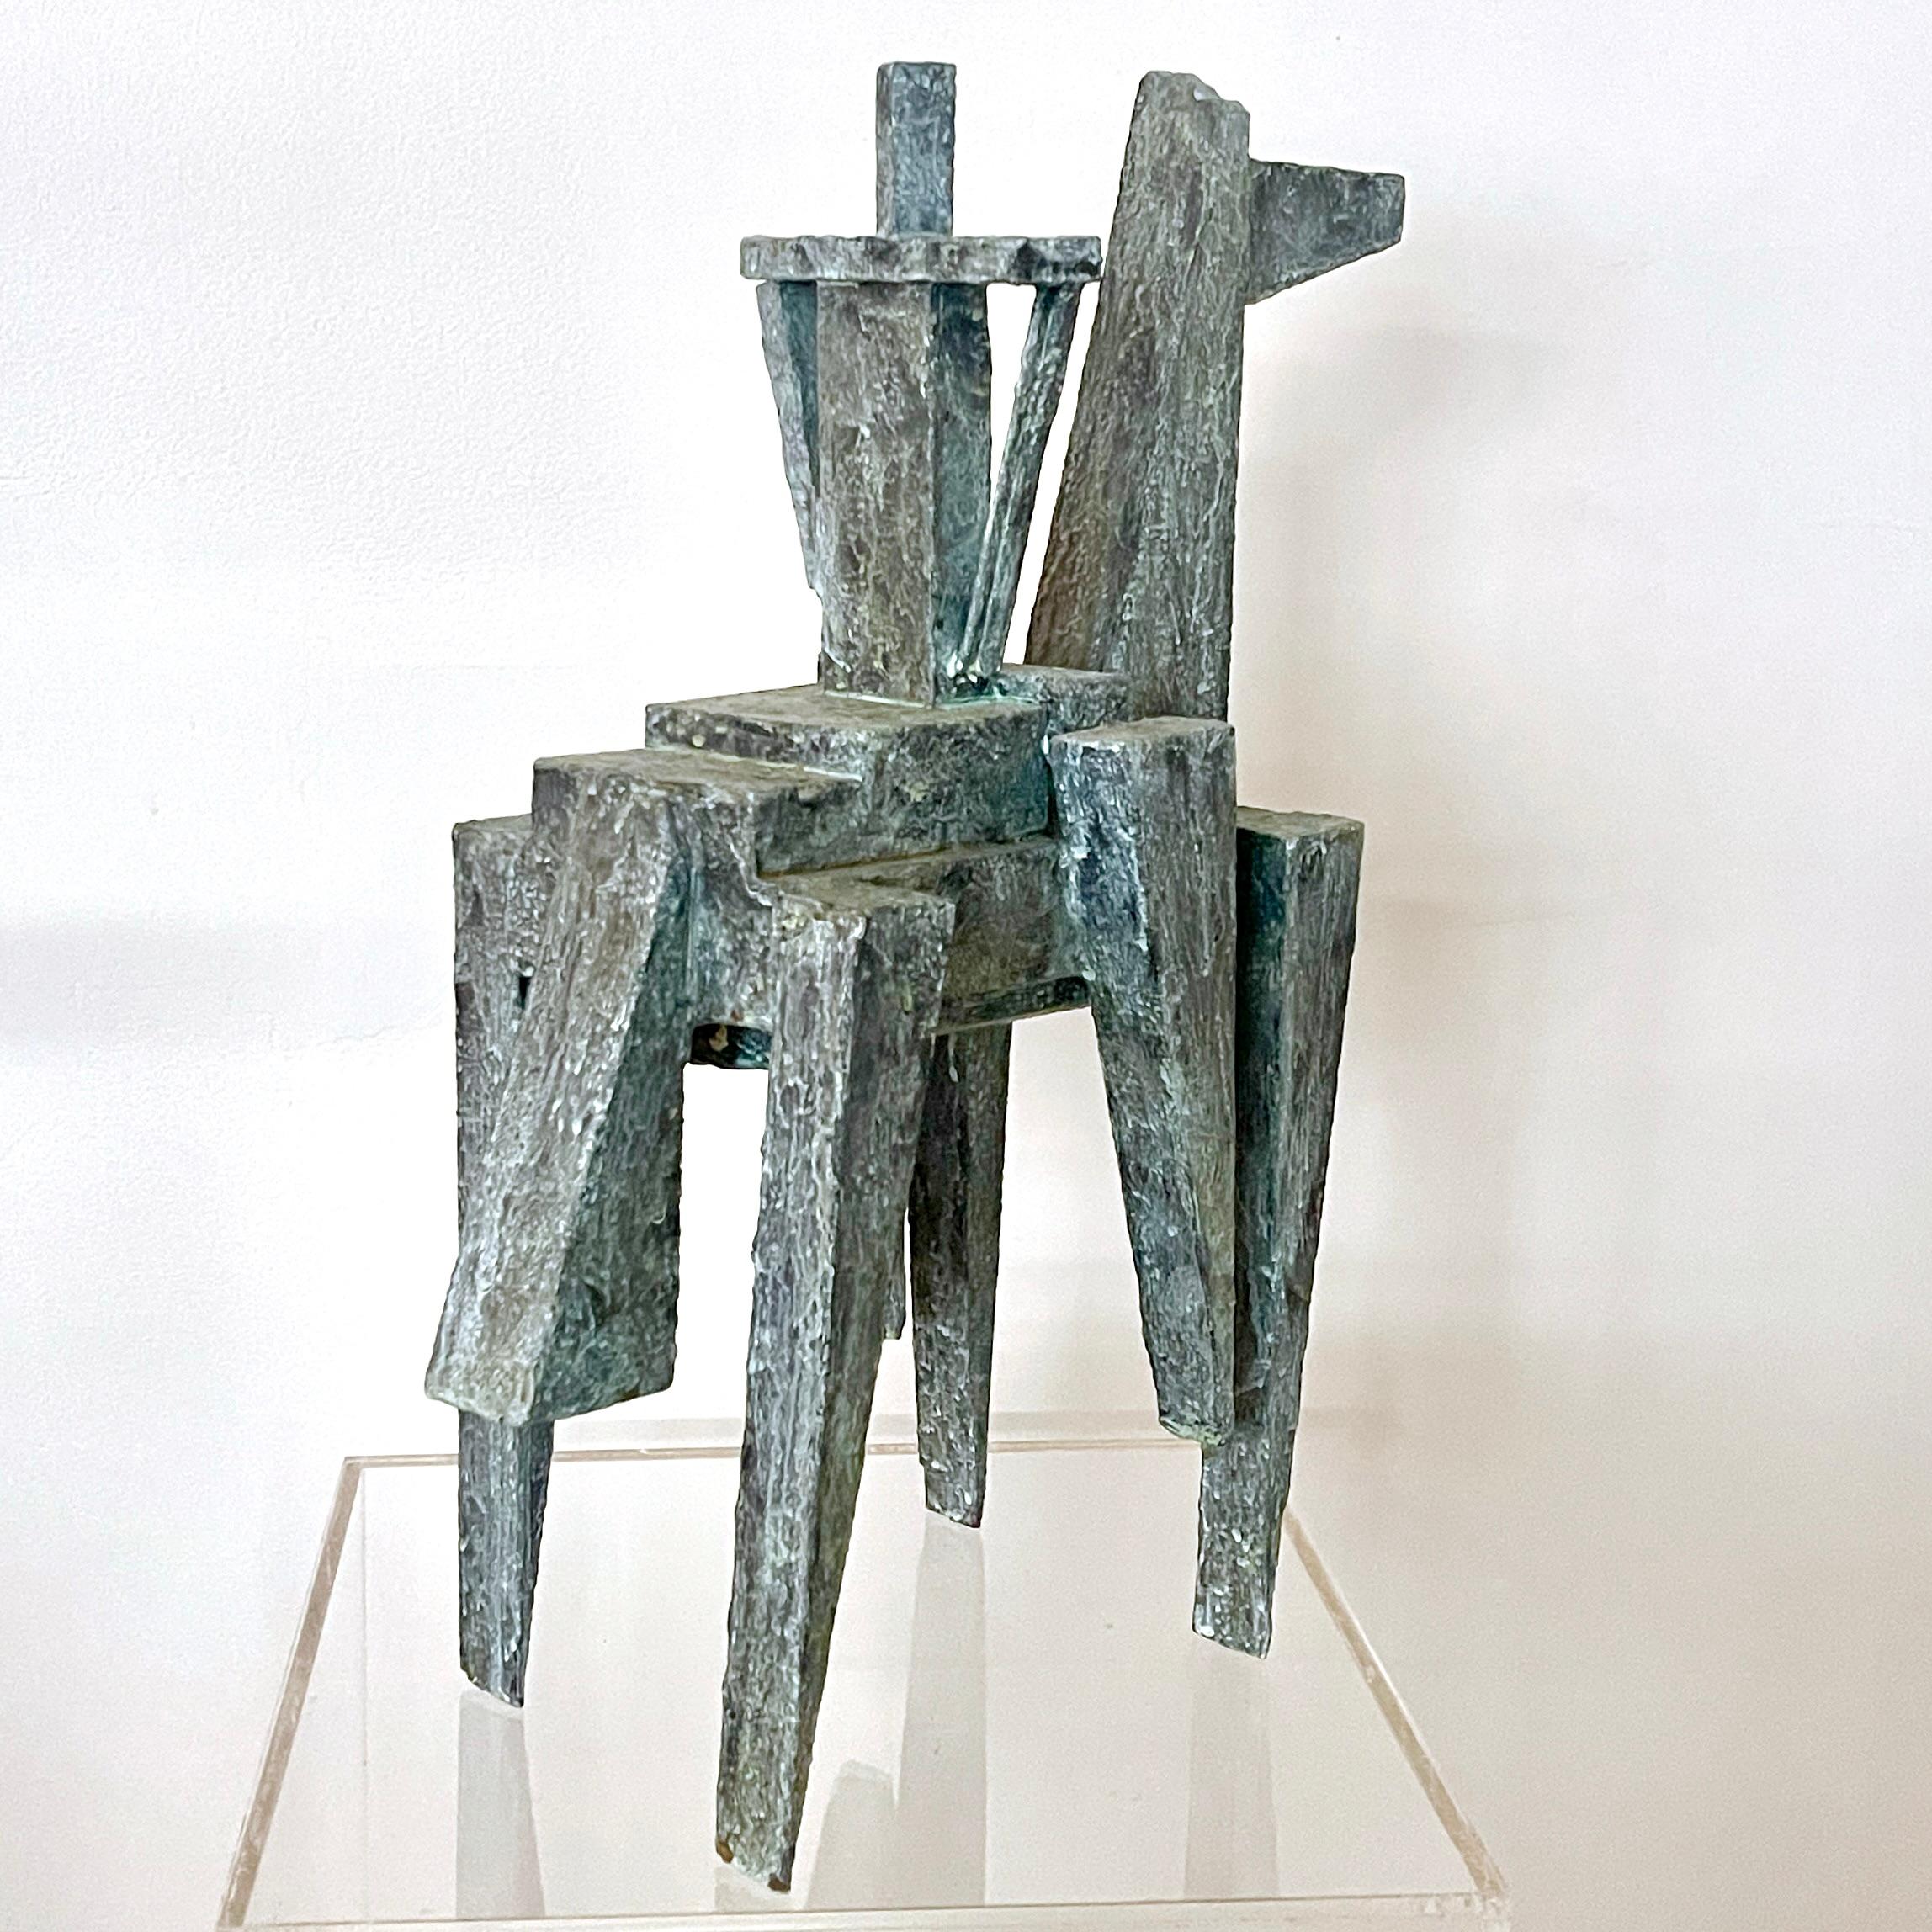 Cubist abstract mixed-media sculpture titled 'Horse and Rider' was created using various materials including wood, papier-mache, and paint by  Bill Low (Scotland 1898-1980). Beautiful weathered bronze verdigris effect surface.